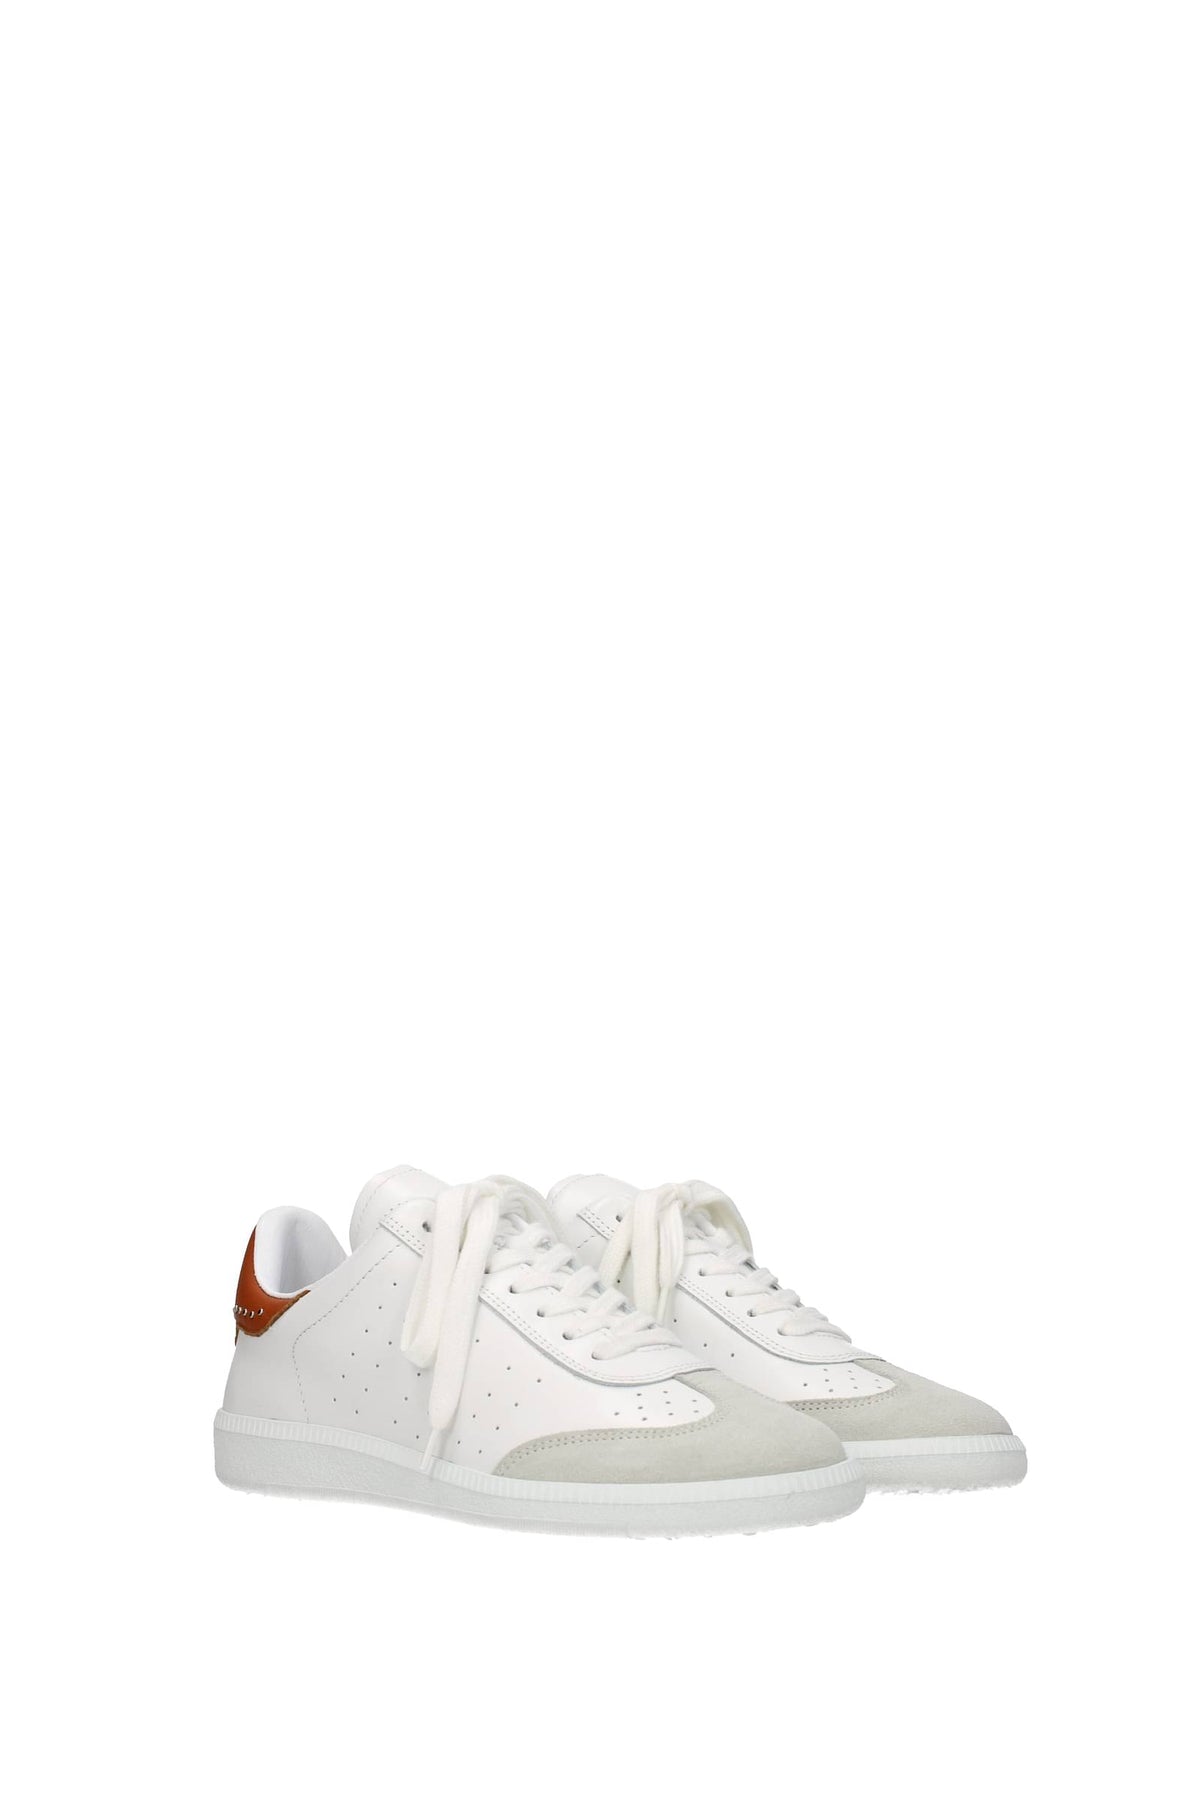 Shop Isabel Marant Sneakers Leather White Brown